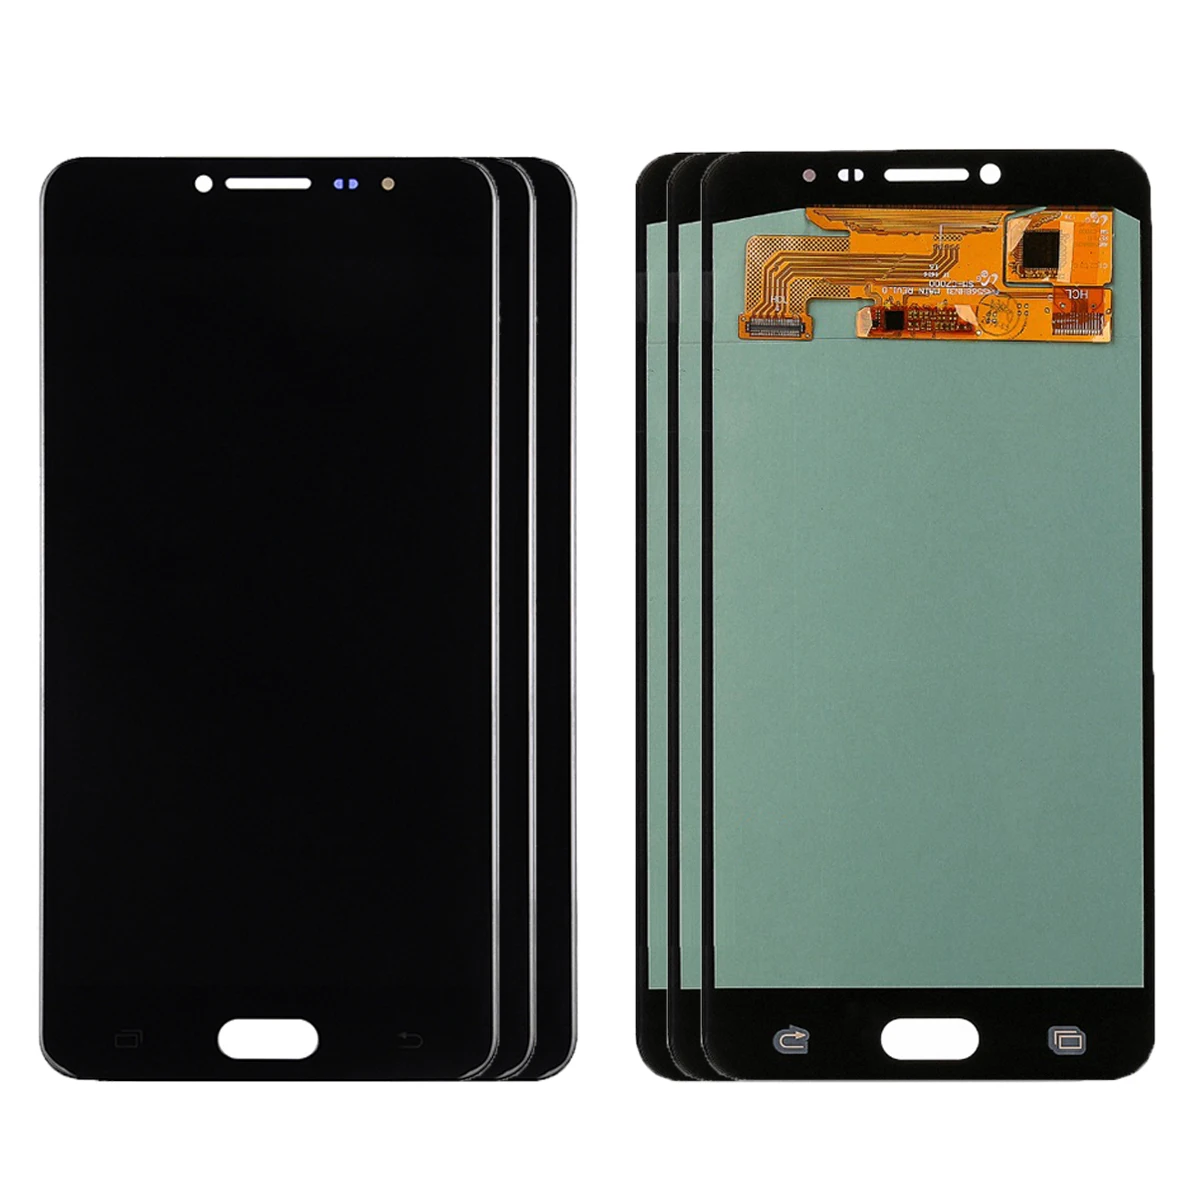 Wholesale c700 Display For Samsung Galaxy C7 2015 C700 lcd SM-C7000 C700F c700 LCD and Touch Screen Digitizer Assembly+Tools enlarge